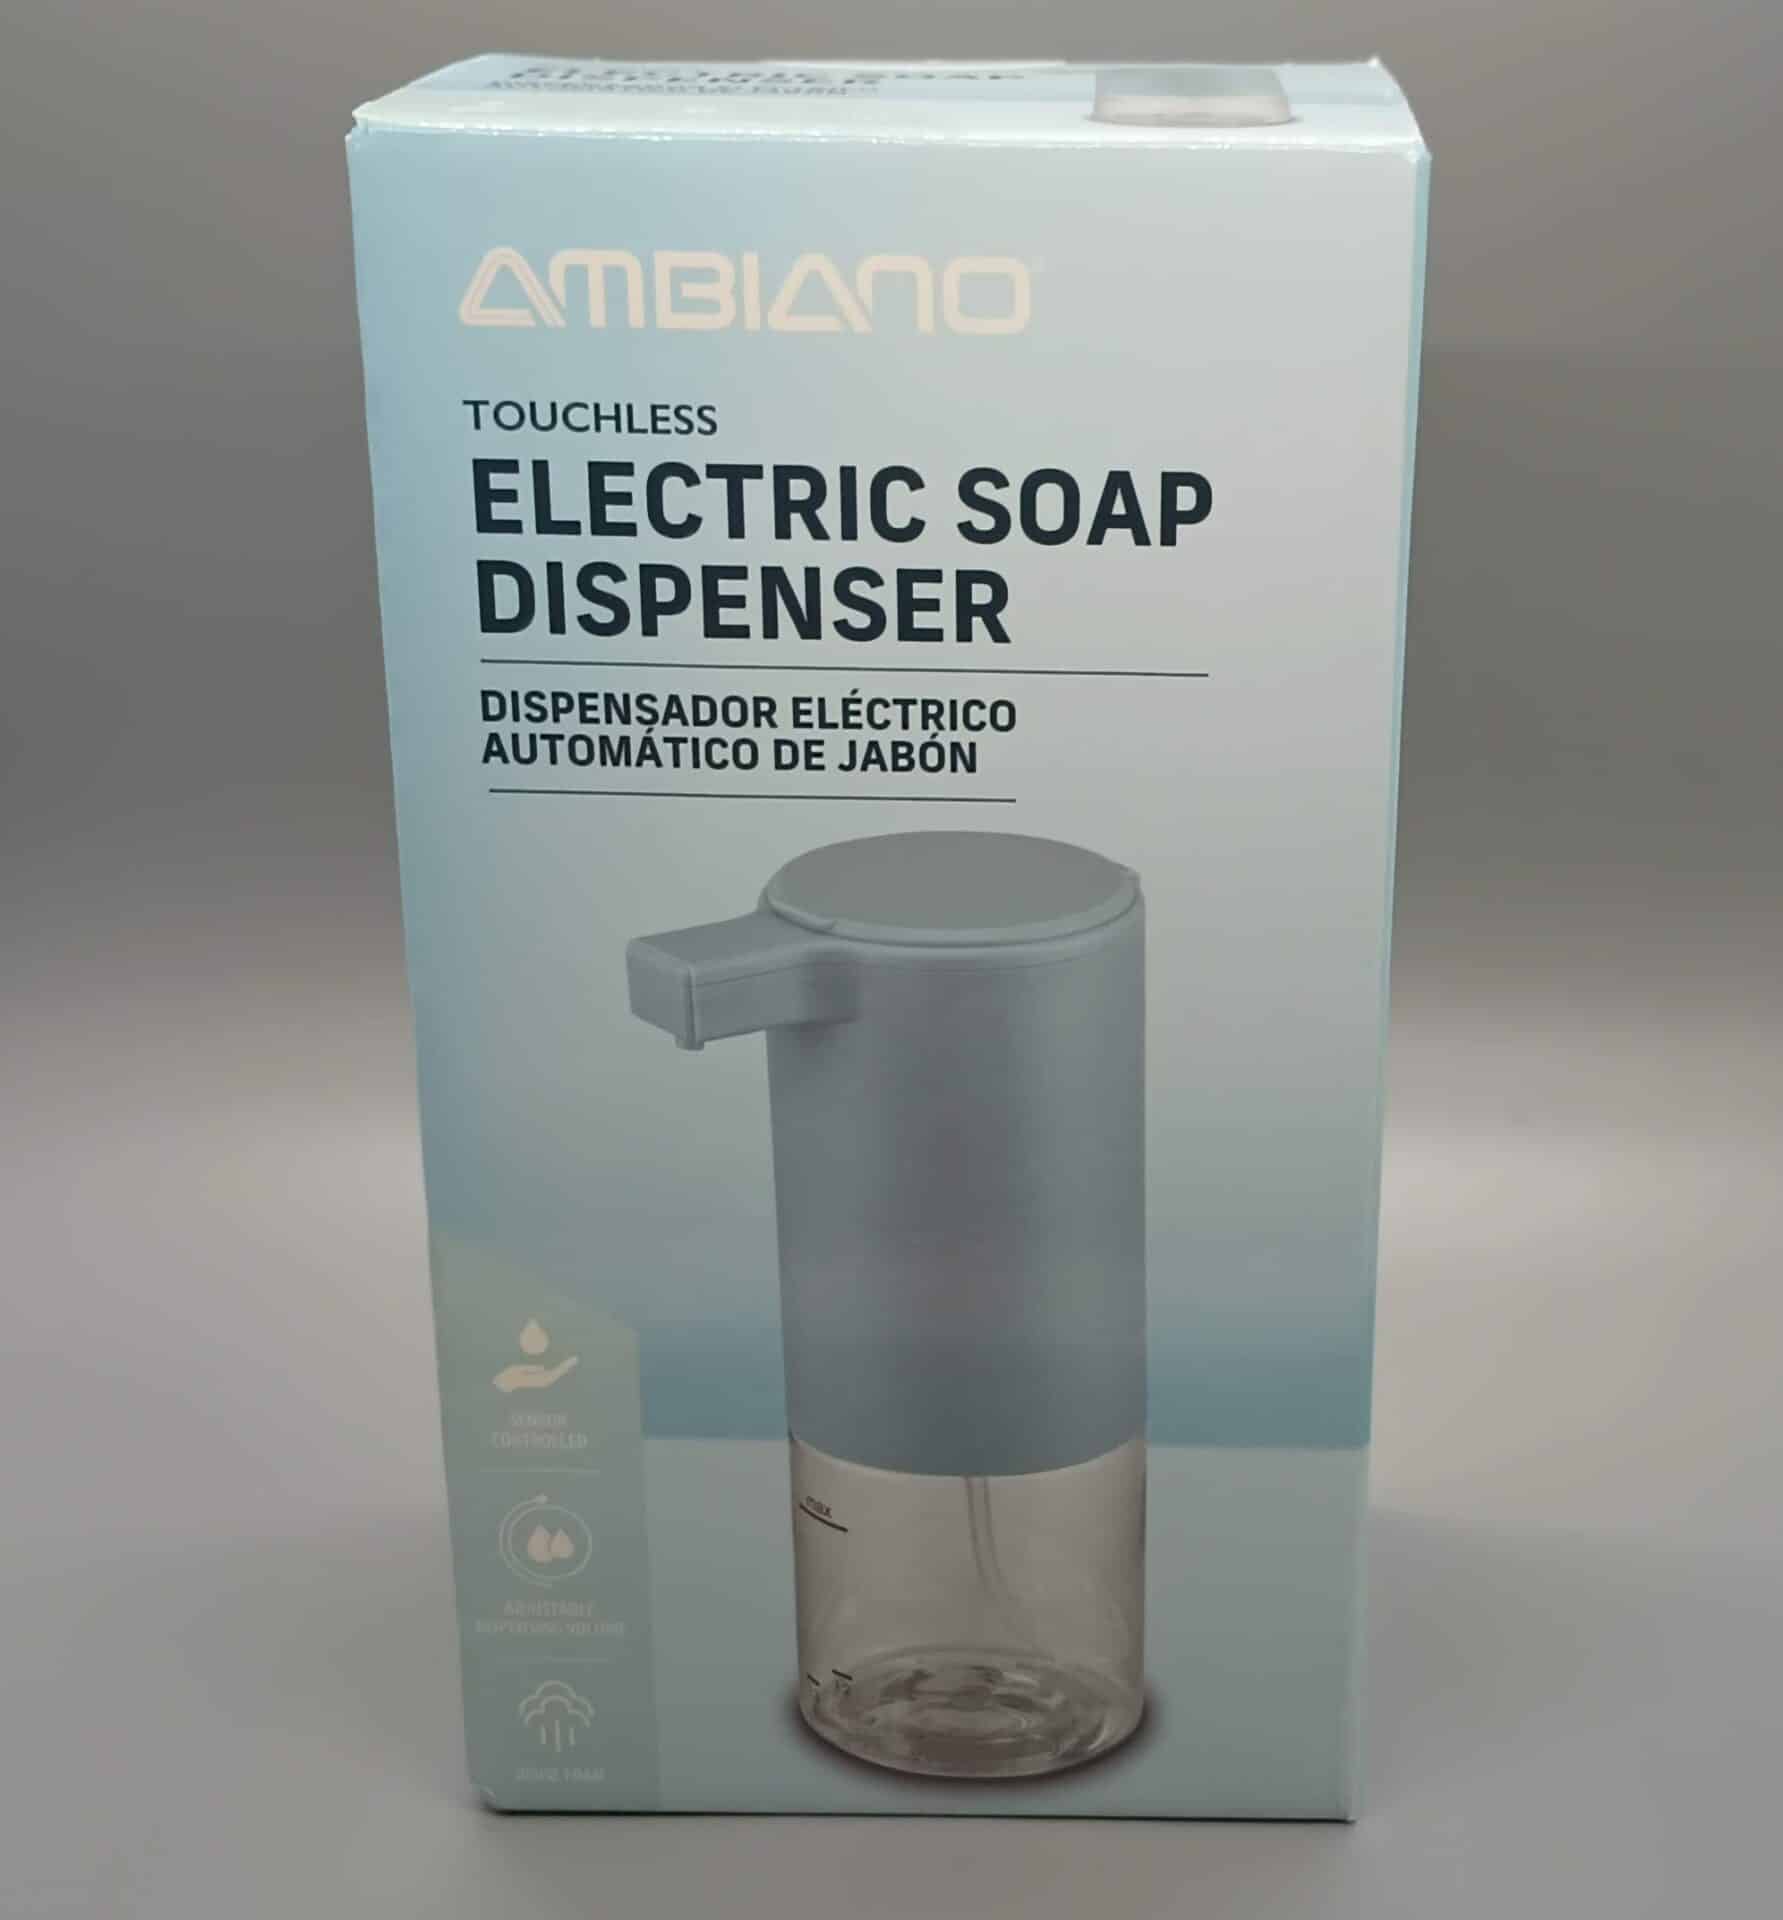 Ambiano Touchless Electric Soap Dispenser